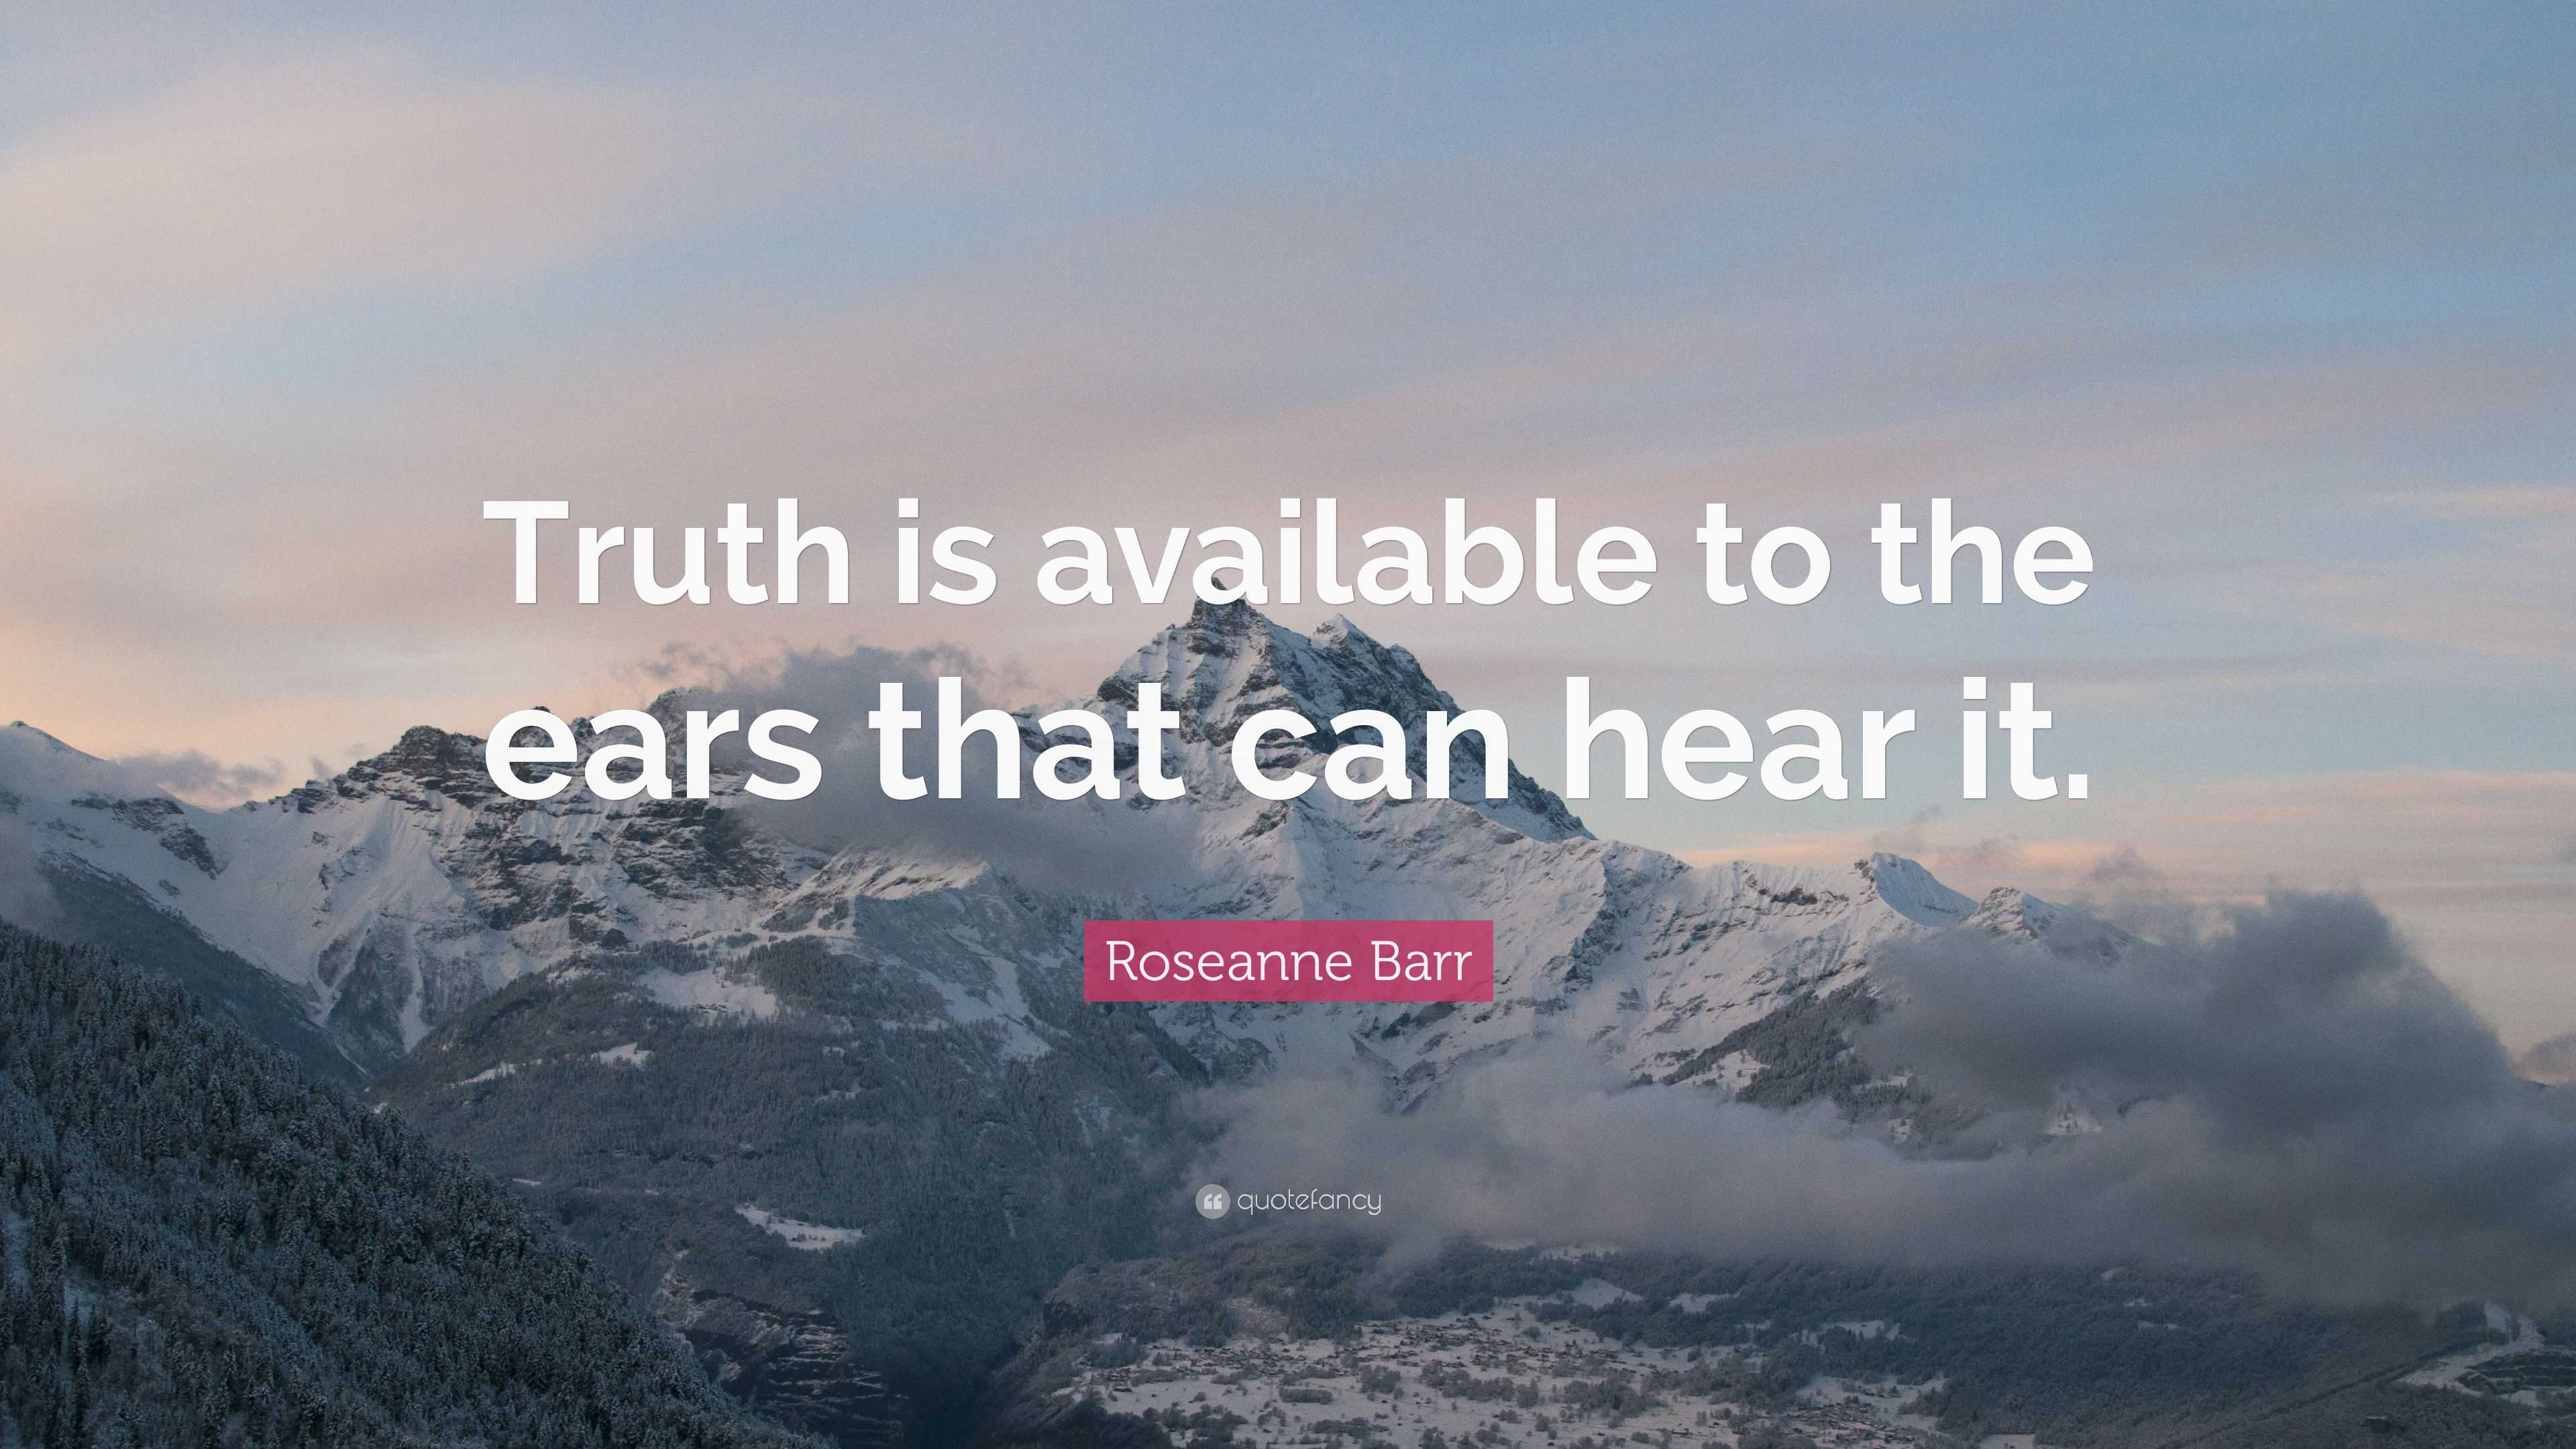 Roseanne Barr Quote: “Truth is available to the ears that can hear it.”